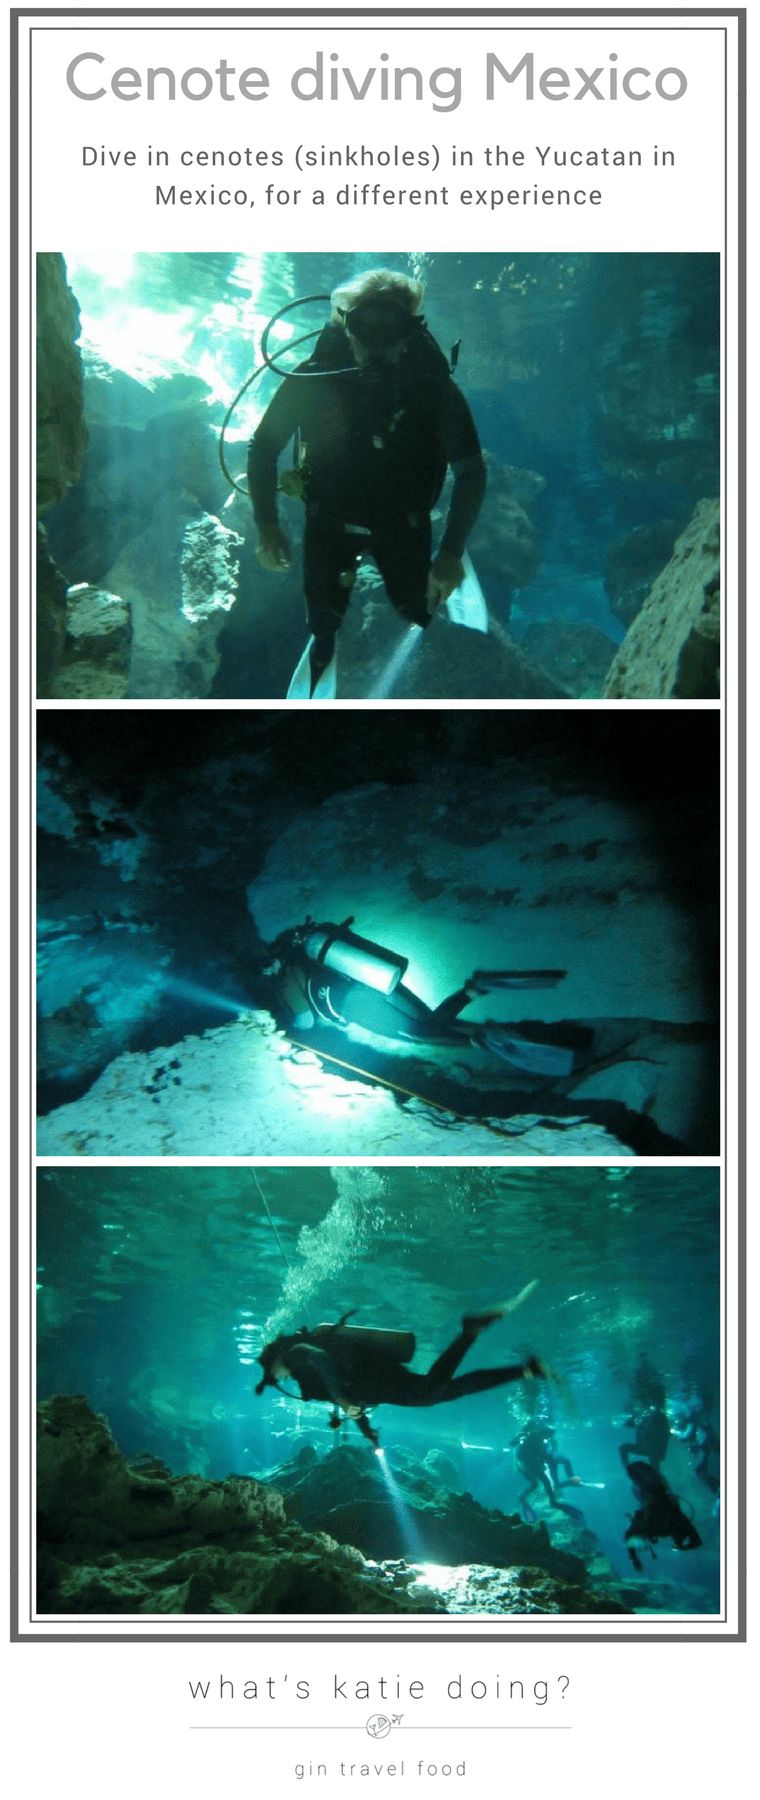 Cenote Diving Mexico image for Pinterest